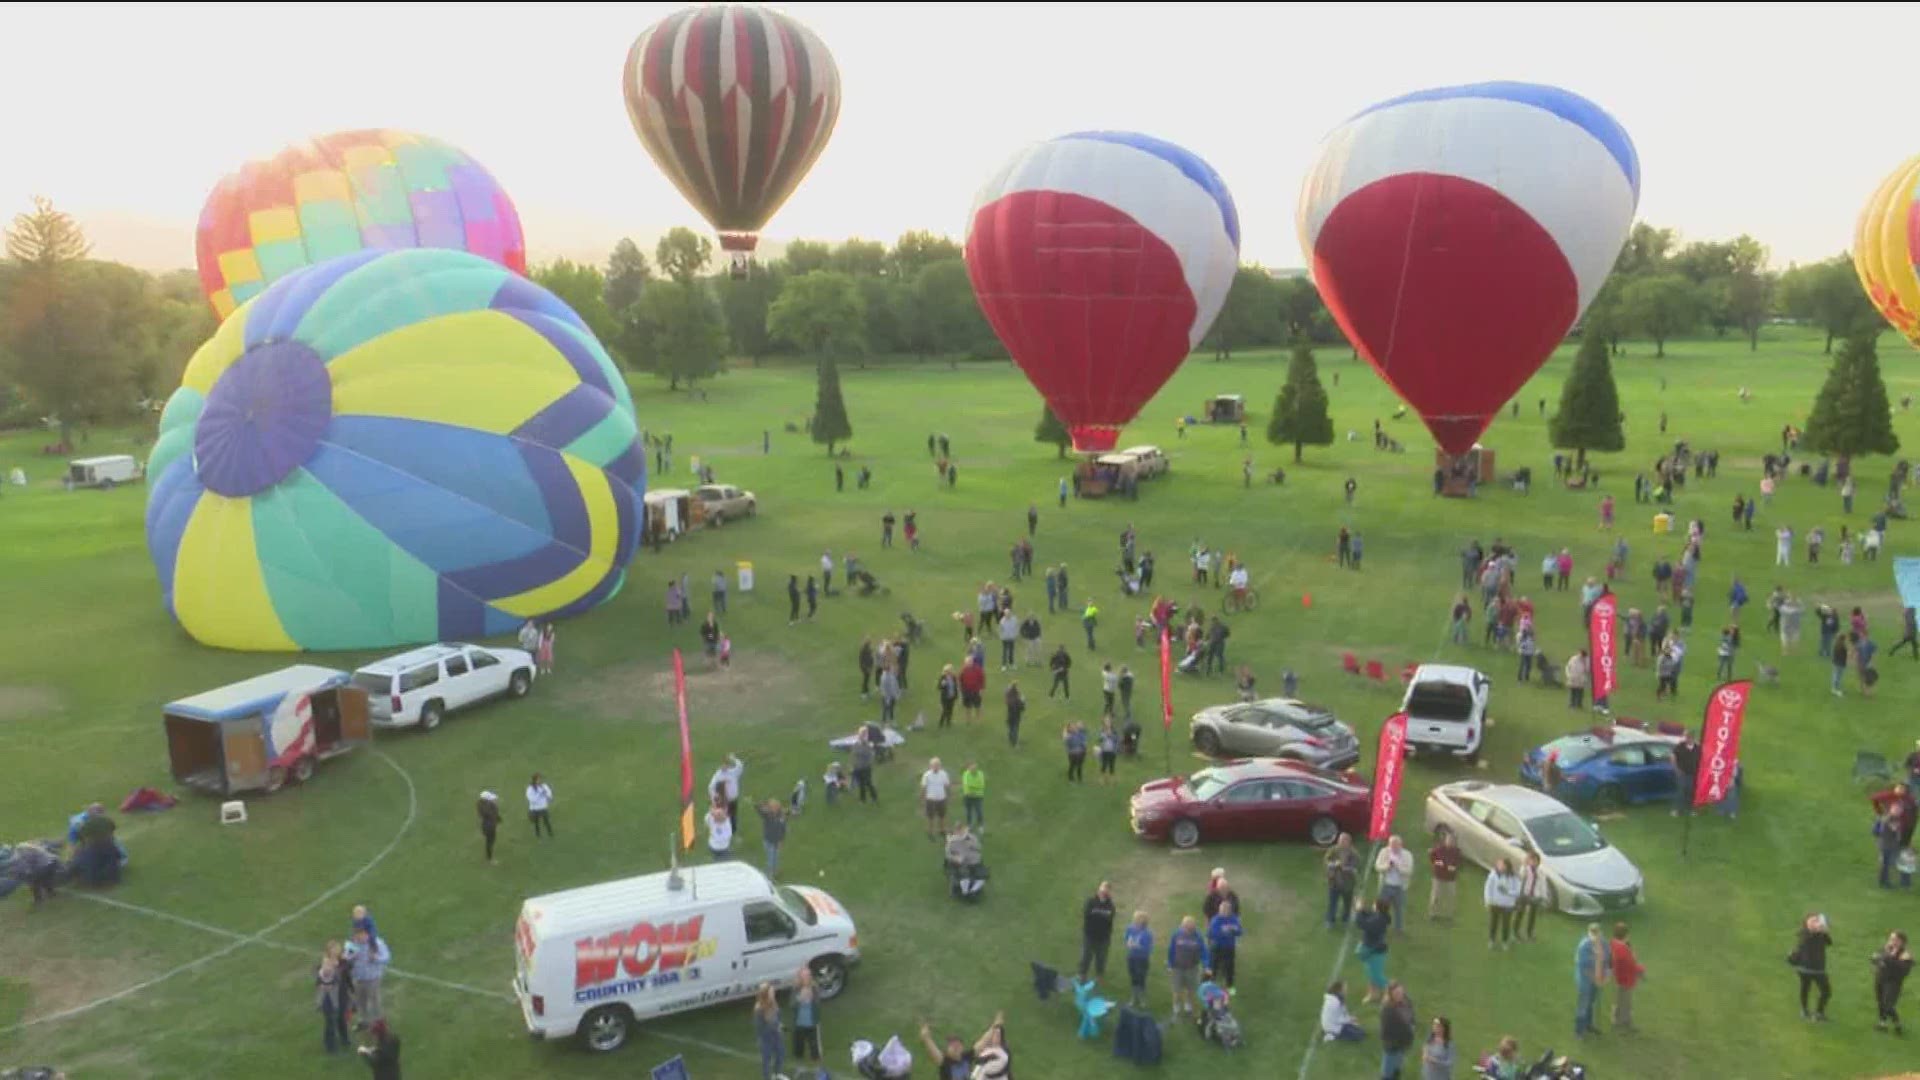 This will be the 30th year for the balloon classic and first since founder Scott Spencer passed away.